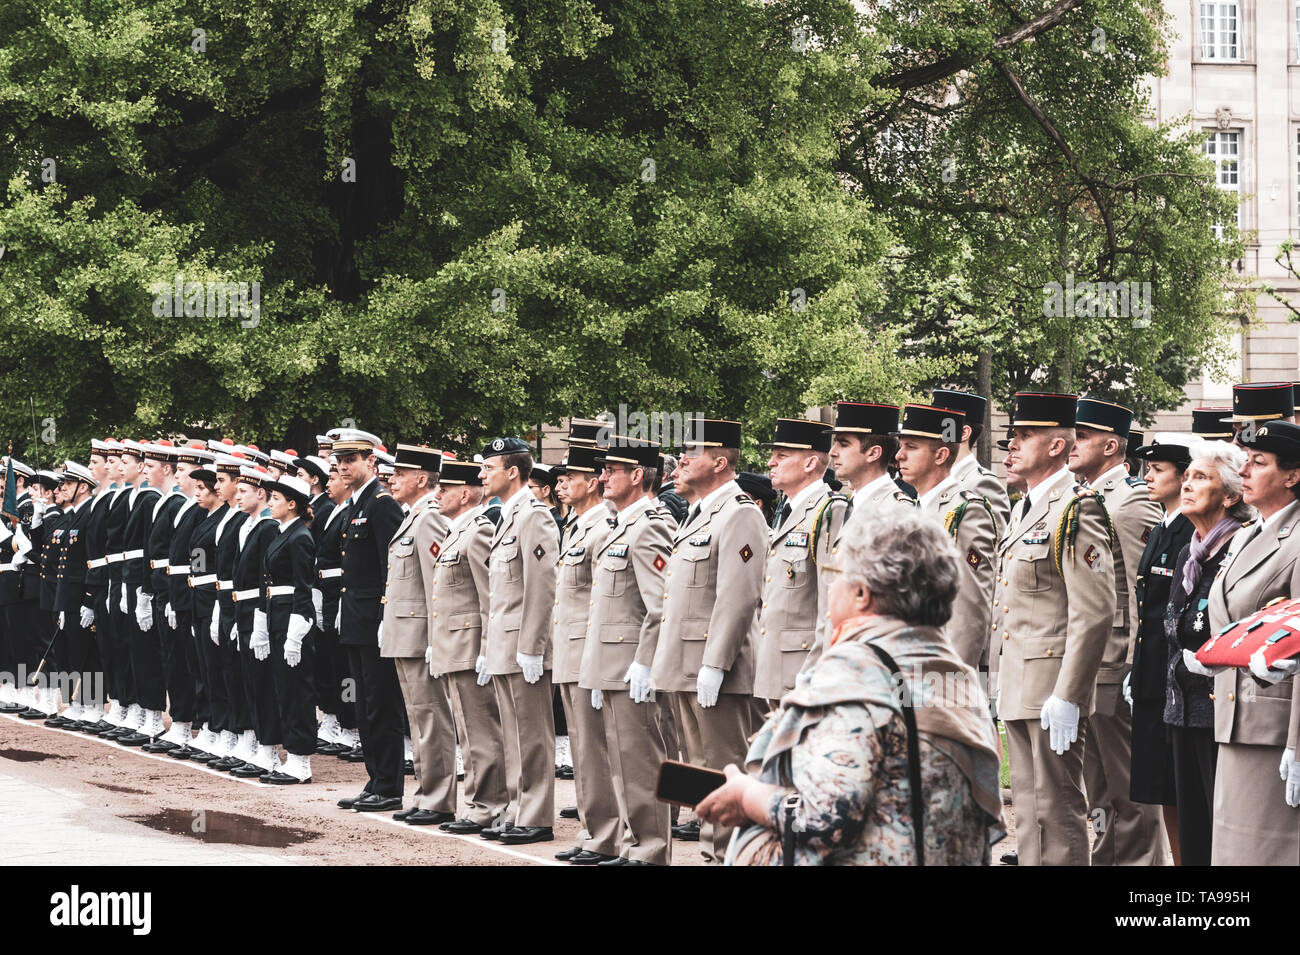 STRASBOURG, FRANCE - MAY 8, 2017: Side view of large group of military personnel at ceremony to mark Western allies World War Two victory Armistice in Europe  victory over Nazi  Stock Photo